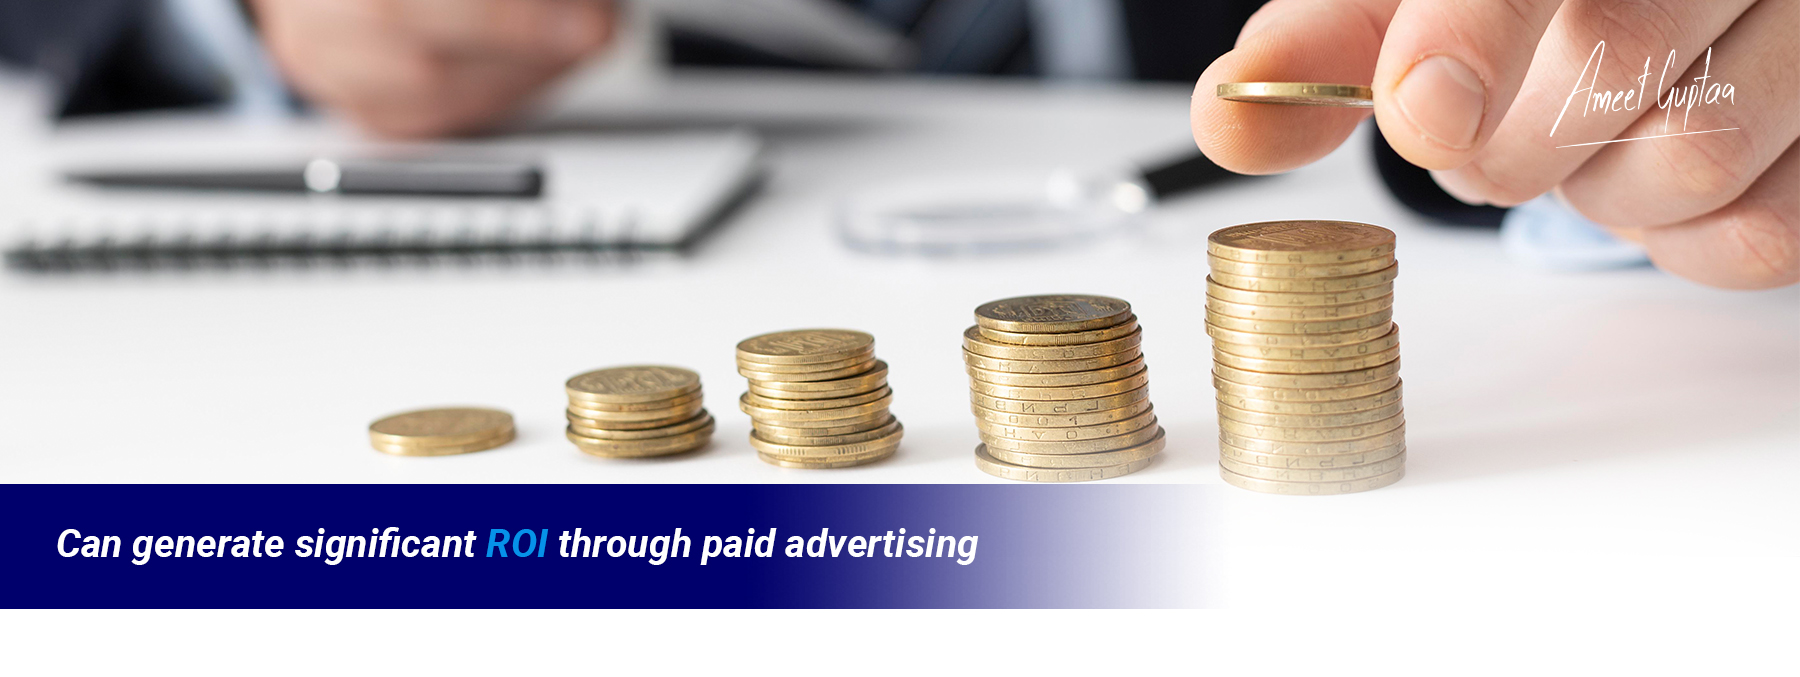 Can-generate-significant-ROI-through-paid-advertising-Ameet-Guptaa